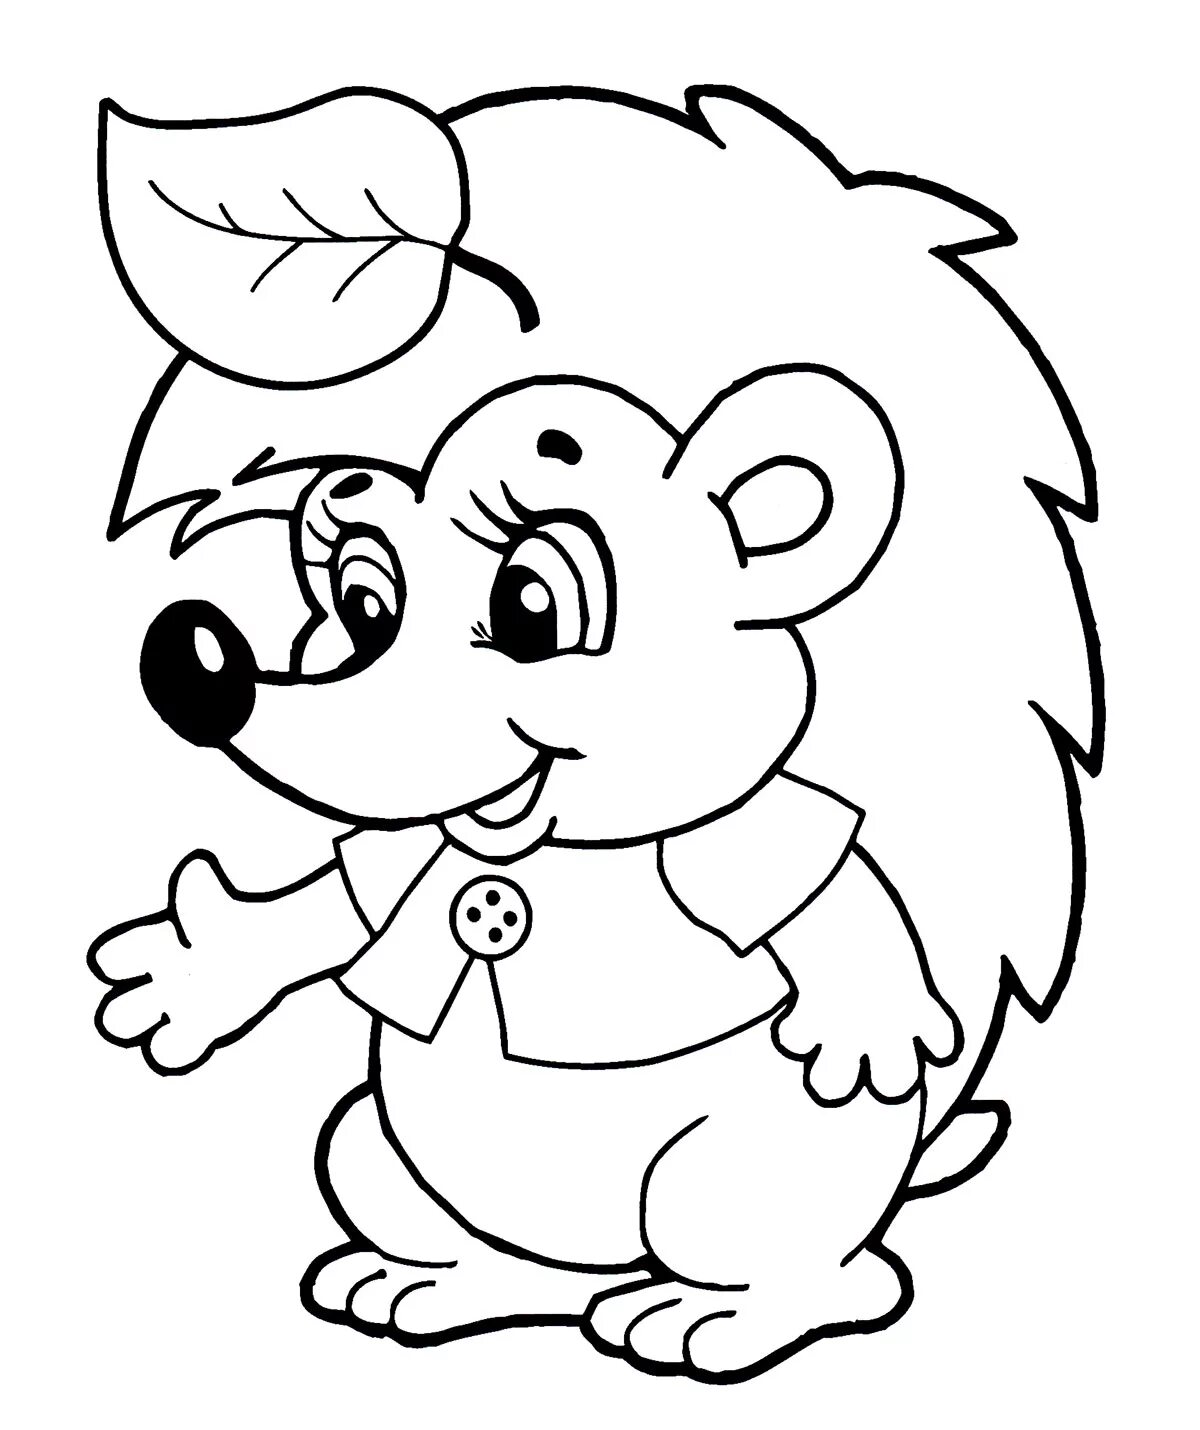 High-impact coloring hedgehog for pre-k